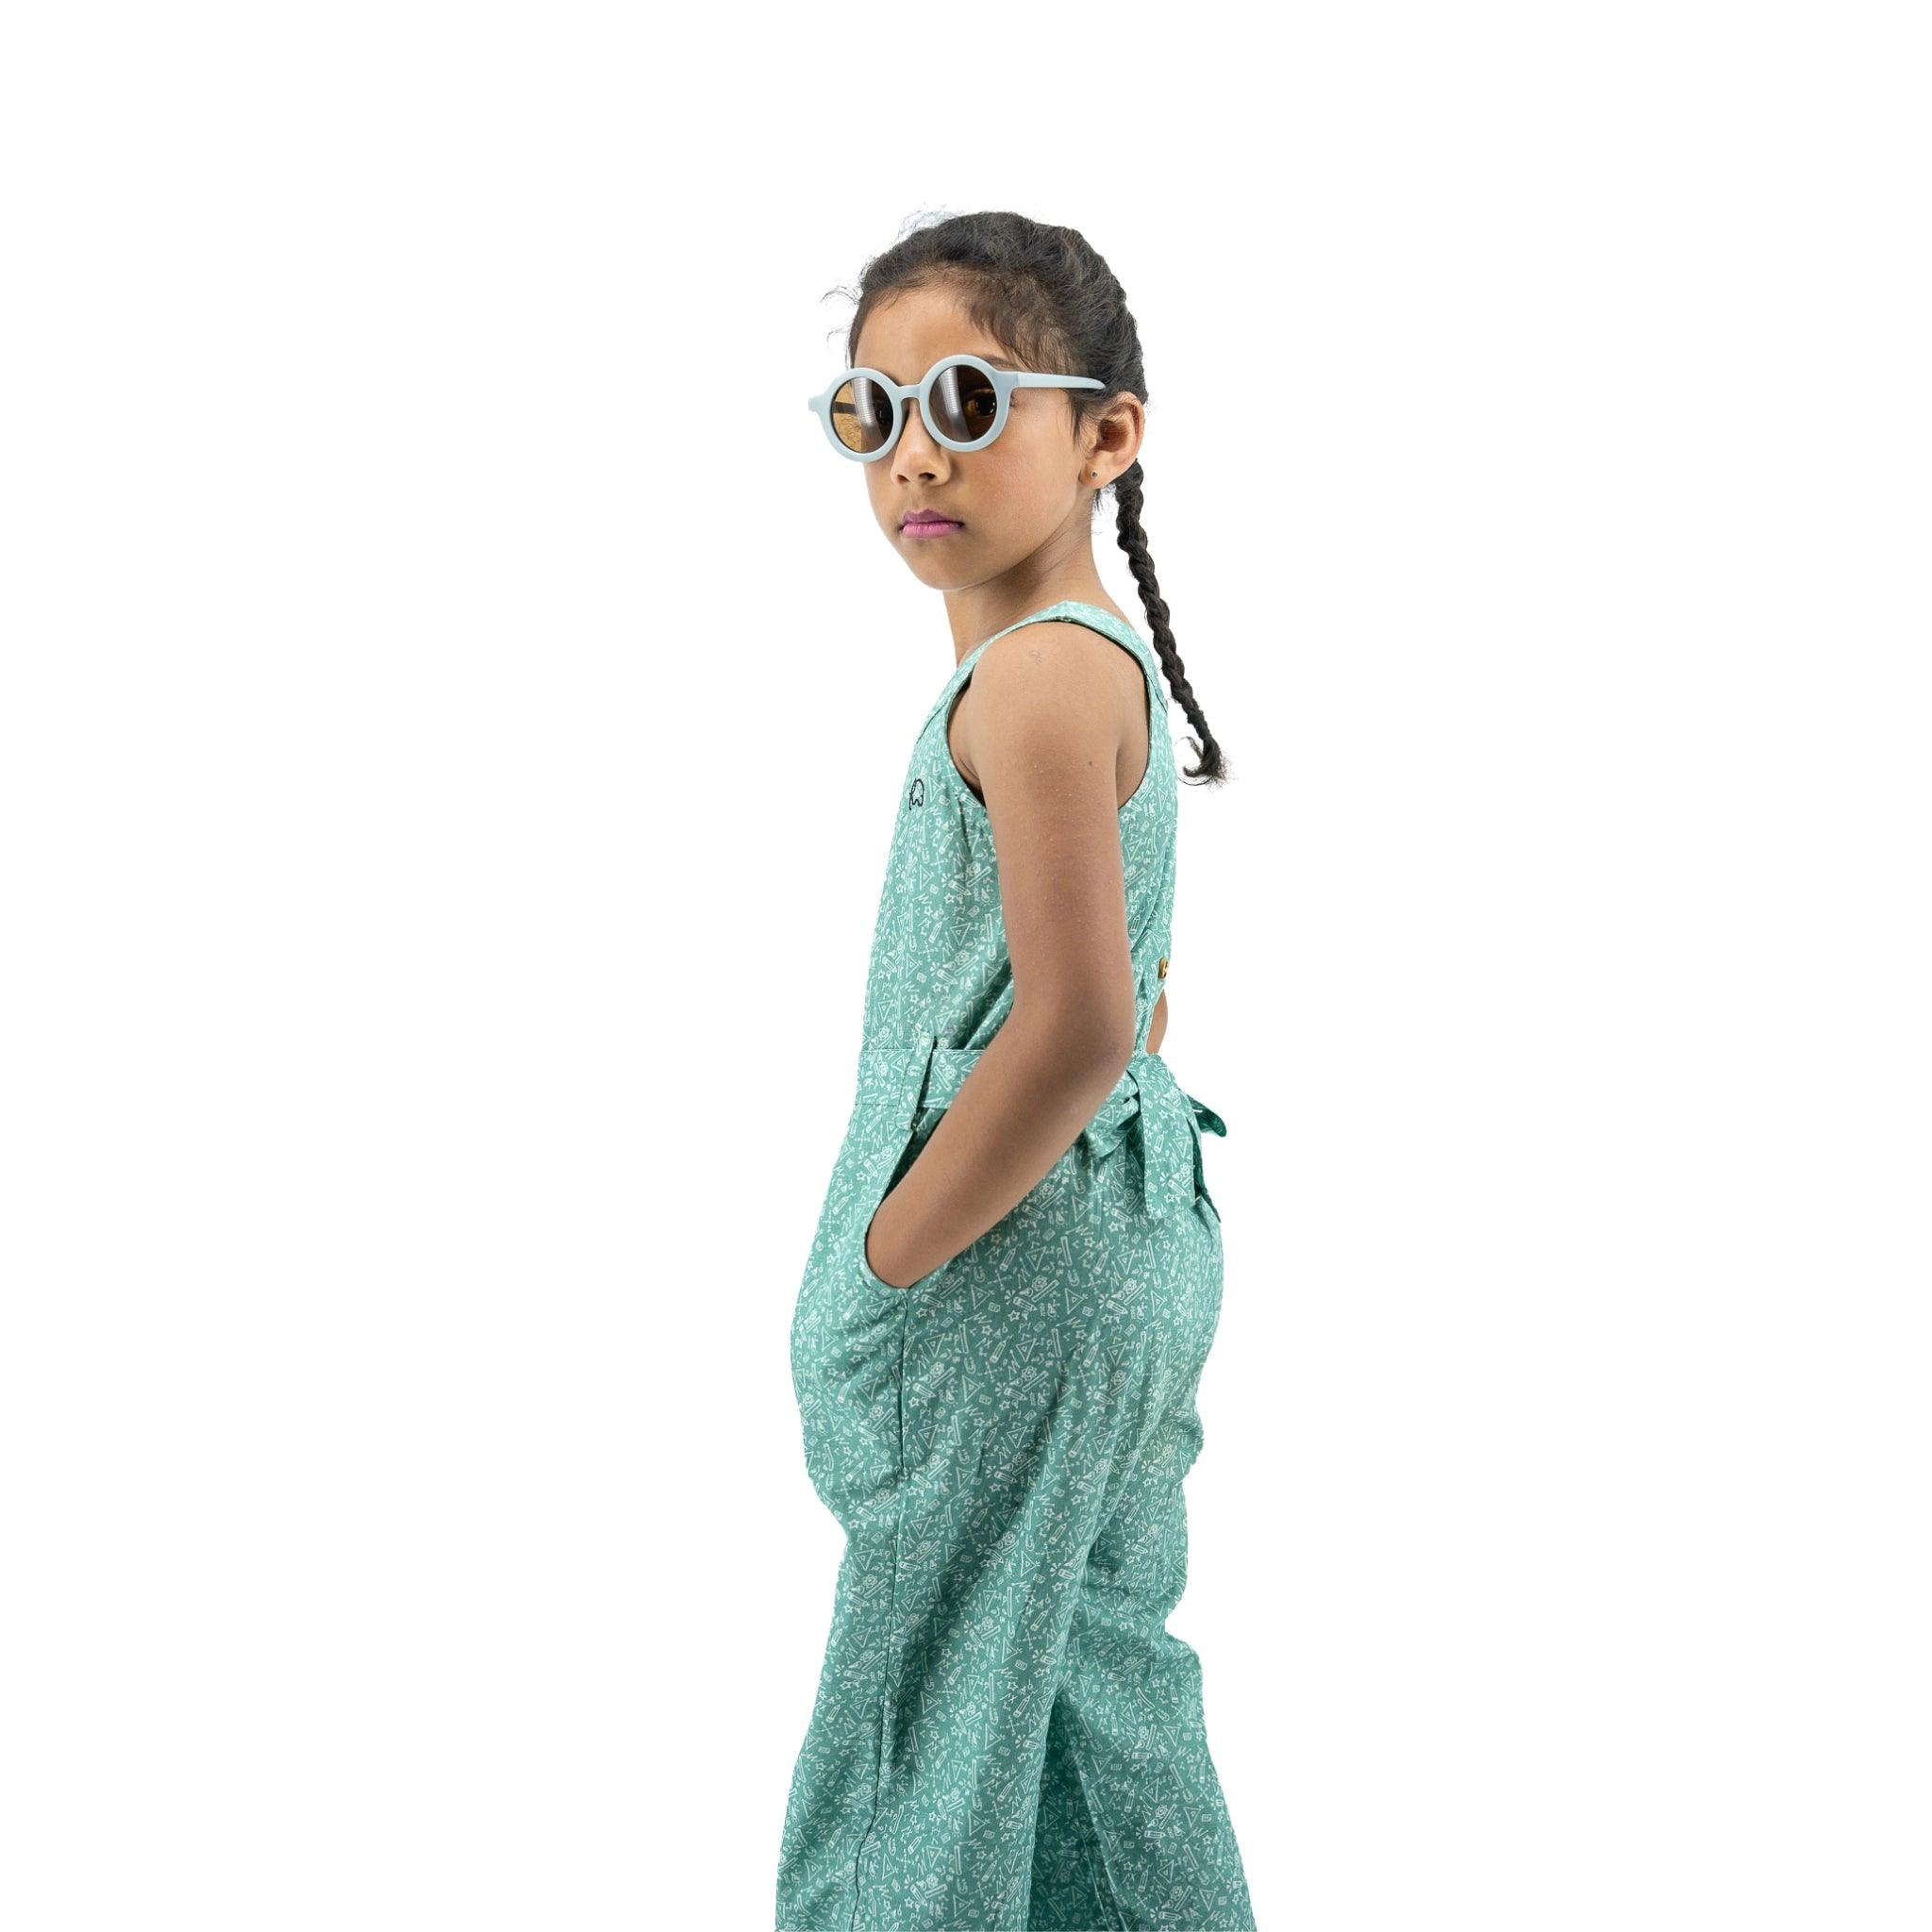 A young girl with braided hair wearing sunglasses and a Smoke Green Cotton Jumpsuit For Girls by Karee stands in profile, looking over her shoulder against a white background.